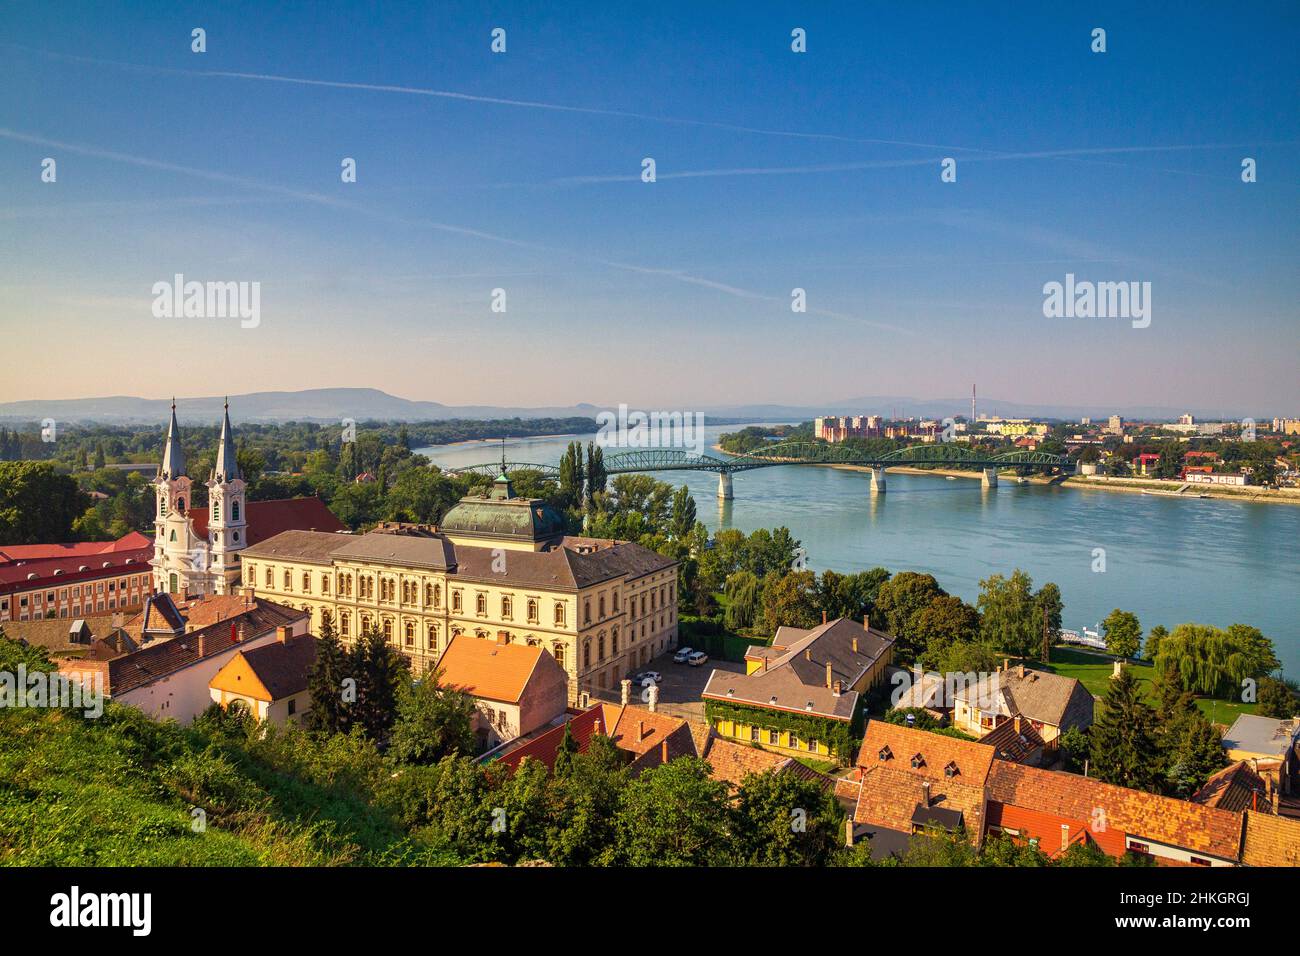 View of the historic town from the Esztergom basilica in Hungary. The Danube river and the border bridge to the town of Sturovo in Slovakia. Stock Photo